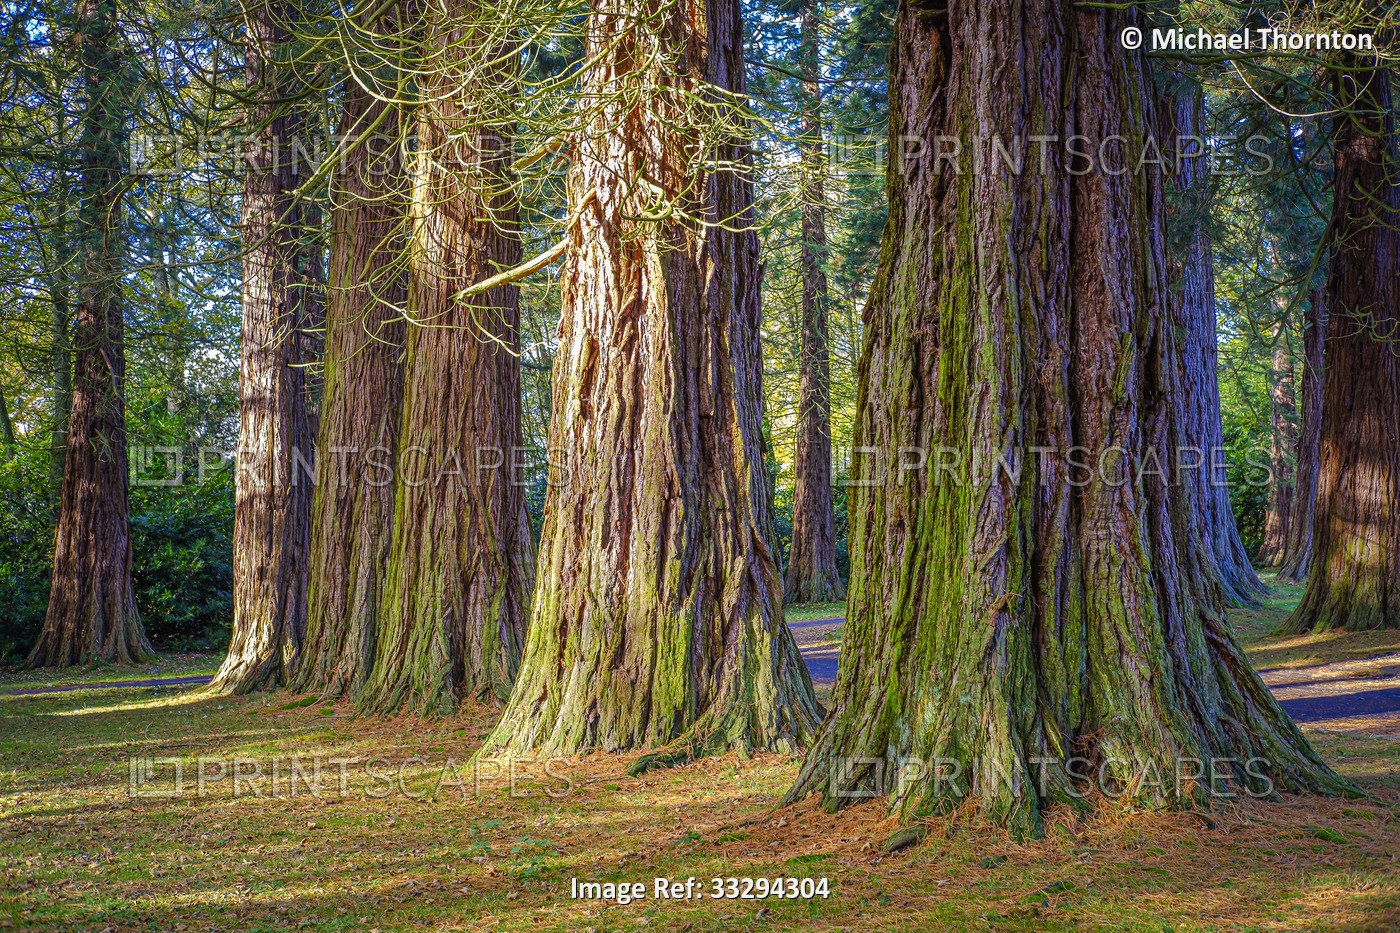 Giant Redwood Trees at Minsteracres, Consett, County Durham, United Kingdom